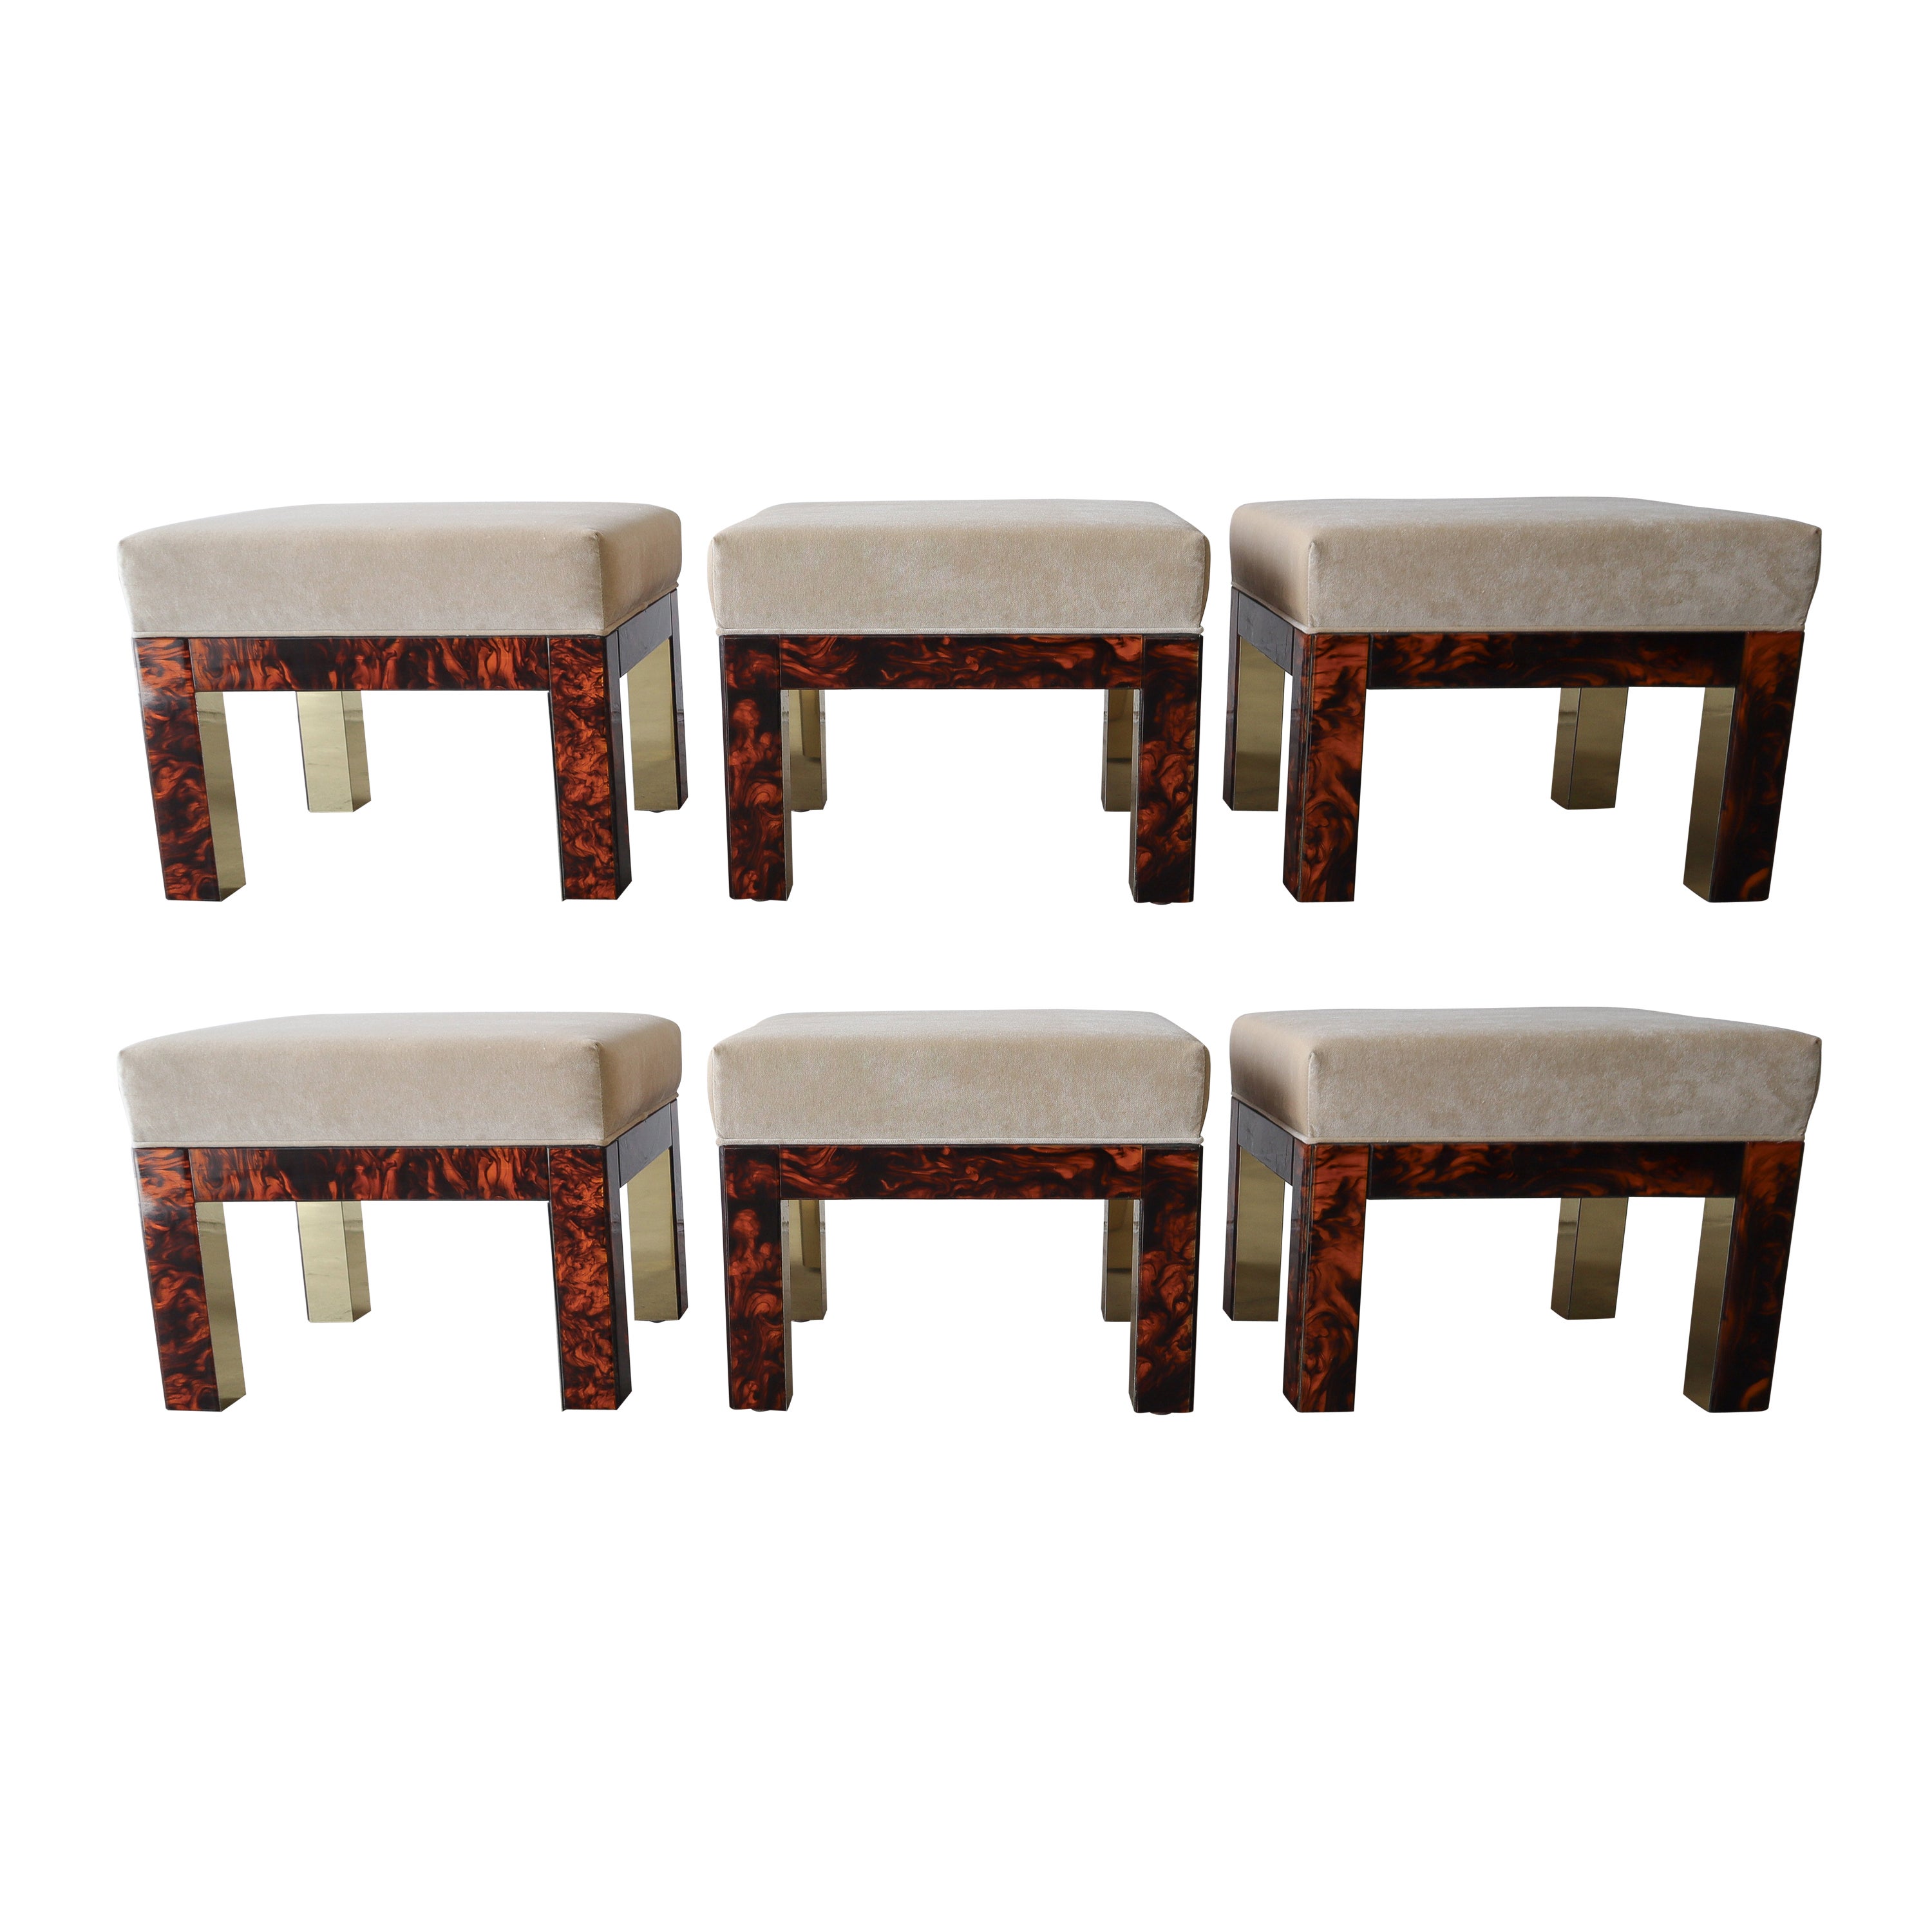 1970s Brass and Bakelite Low Stools Ottomans - Set of 6